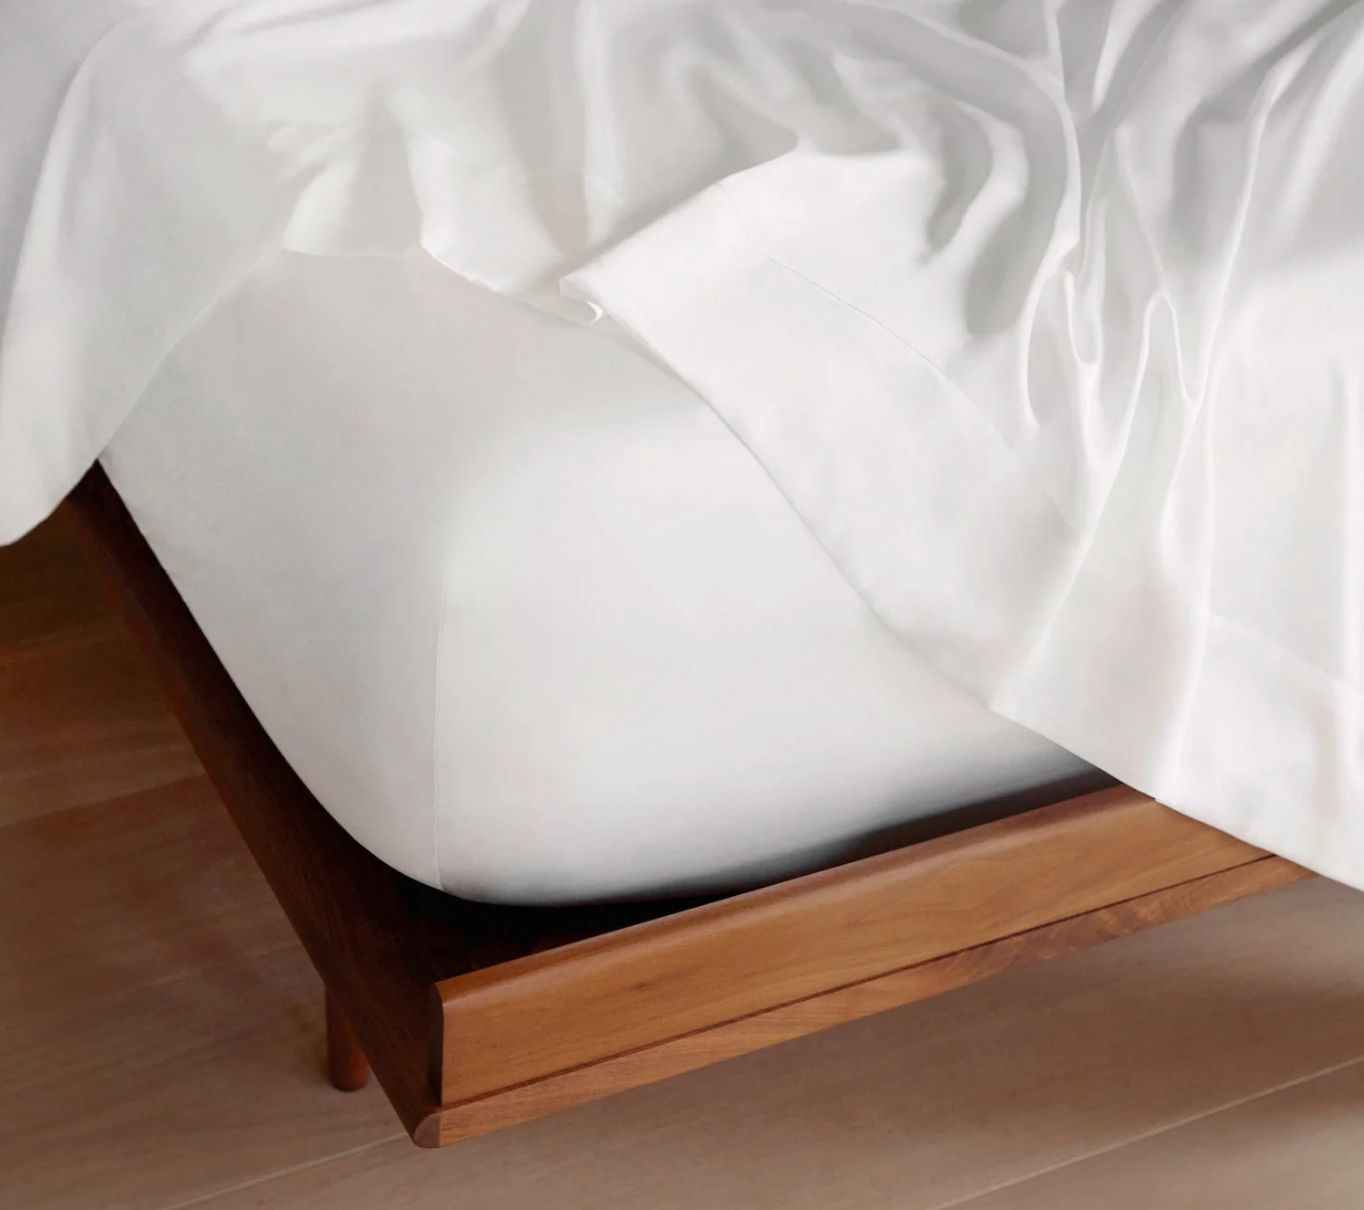 An unadorned white fitted sheet on a bed with a visible wooden bed frame